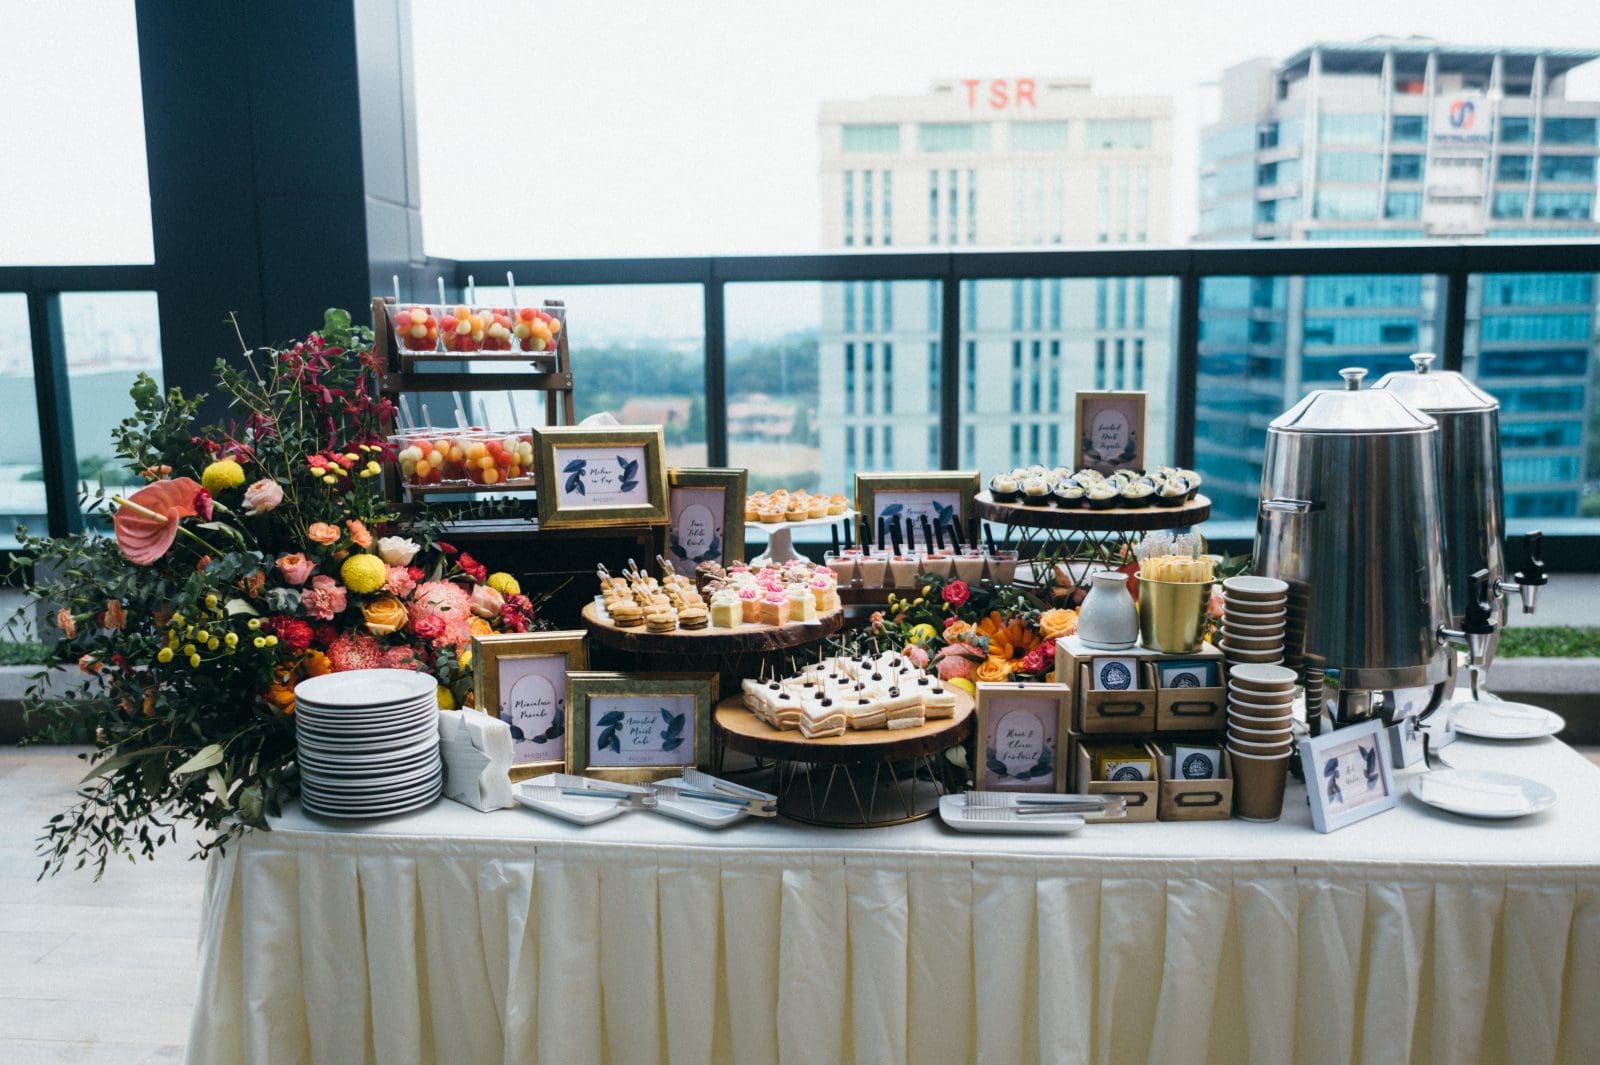 A wide selection of food provided by Colony's in-house caterers at the Mutiara Damansara event space.